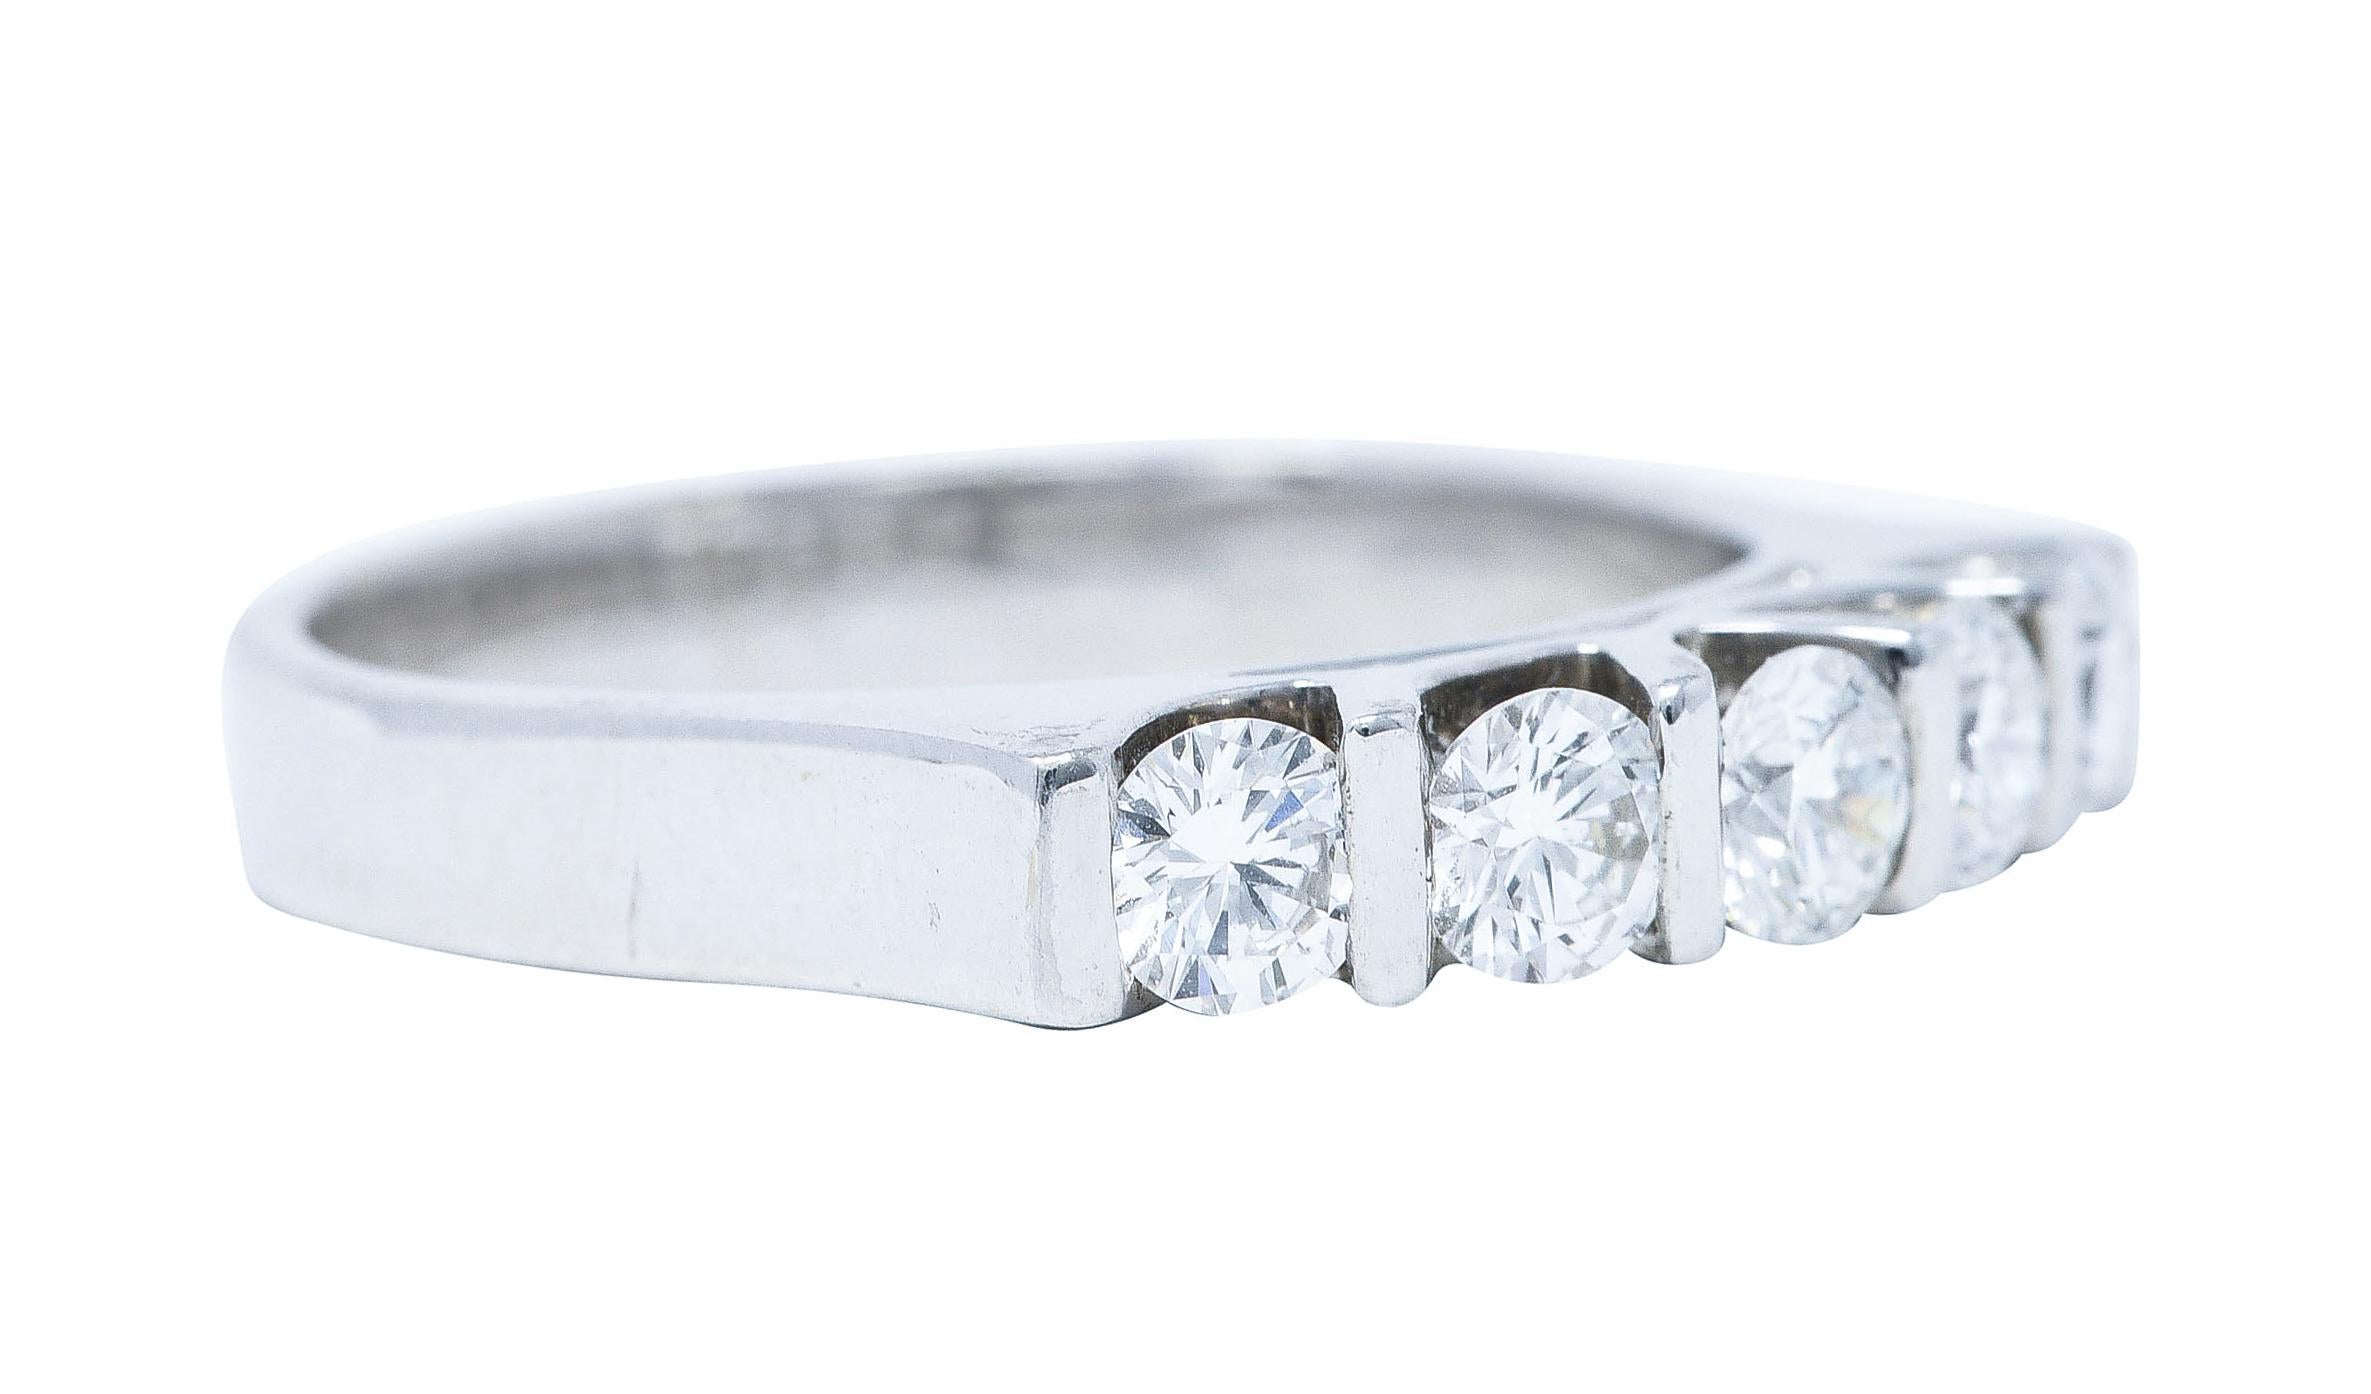 Band ring features five round brilliant cut diamonds bar set to front

Weighing approximately 0.75 carat total - G/H in color with VS clarity

With a stylized profile and high polished finish

Stamped 18K for 18 karat white gold

With maker's